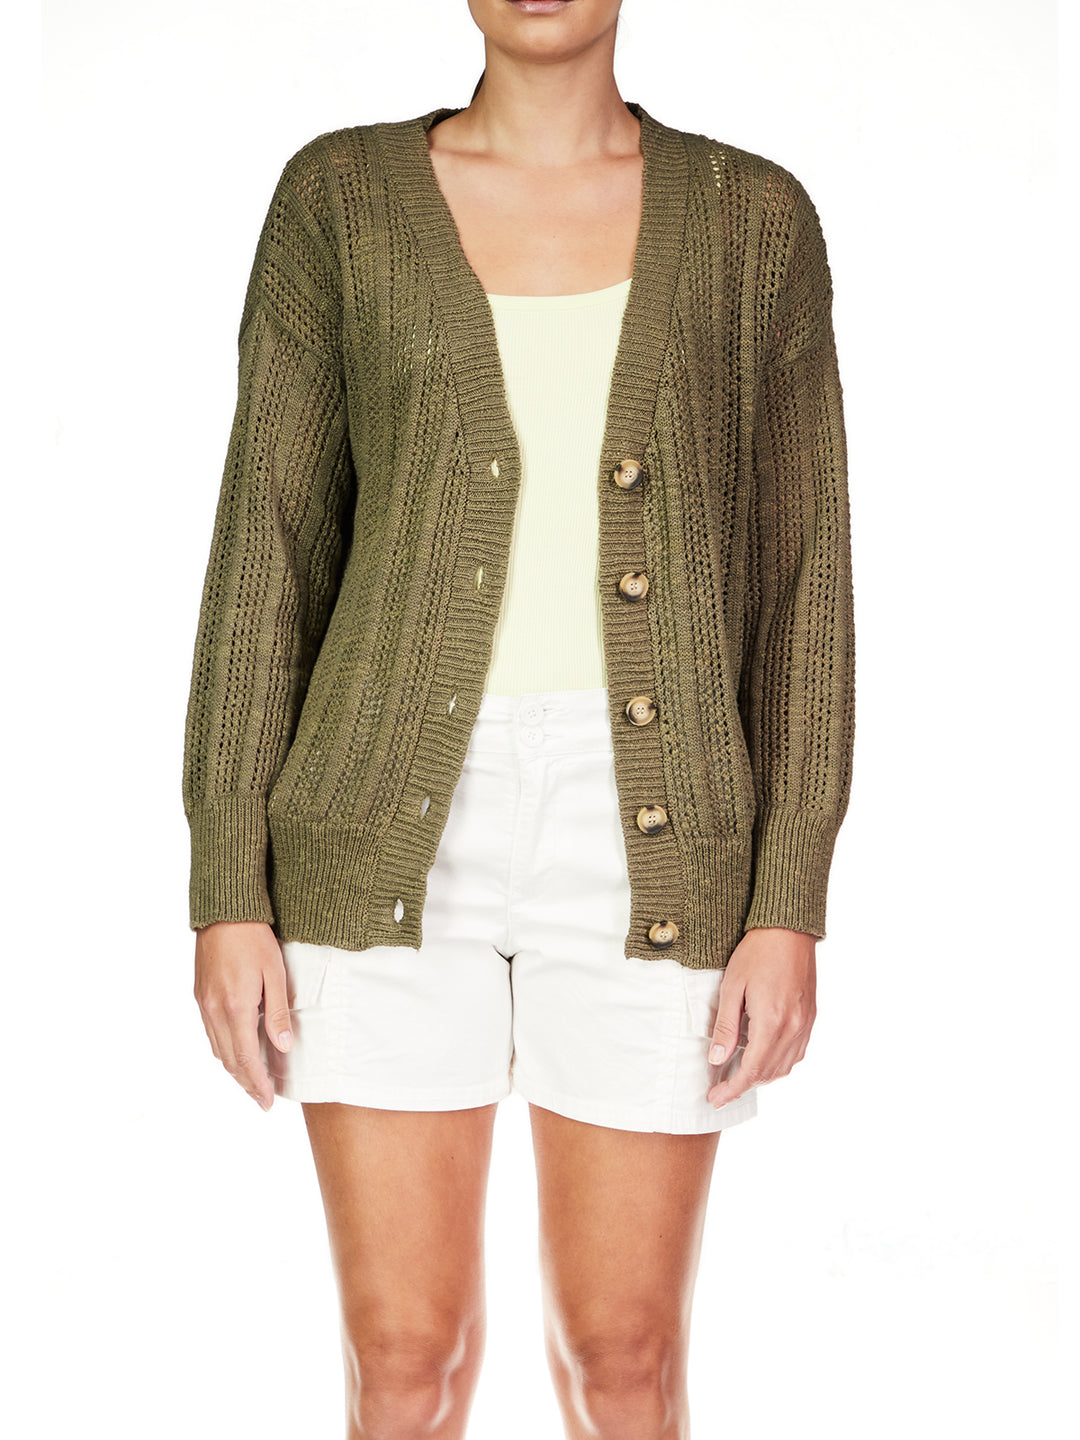 HAPPY DAYS CARDI-BURNT OLIVE - Kingfisher Road - Online Boutique